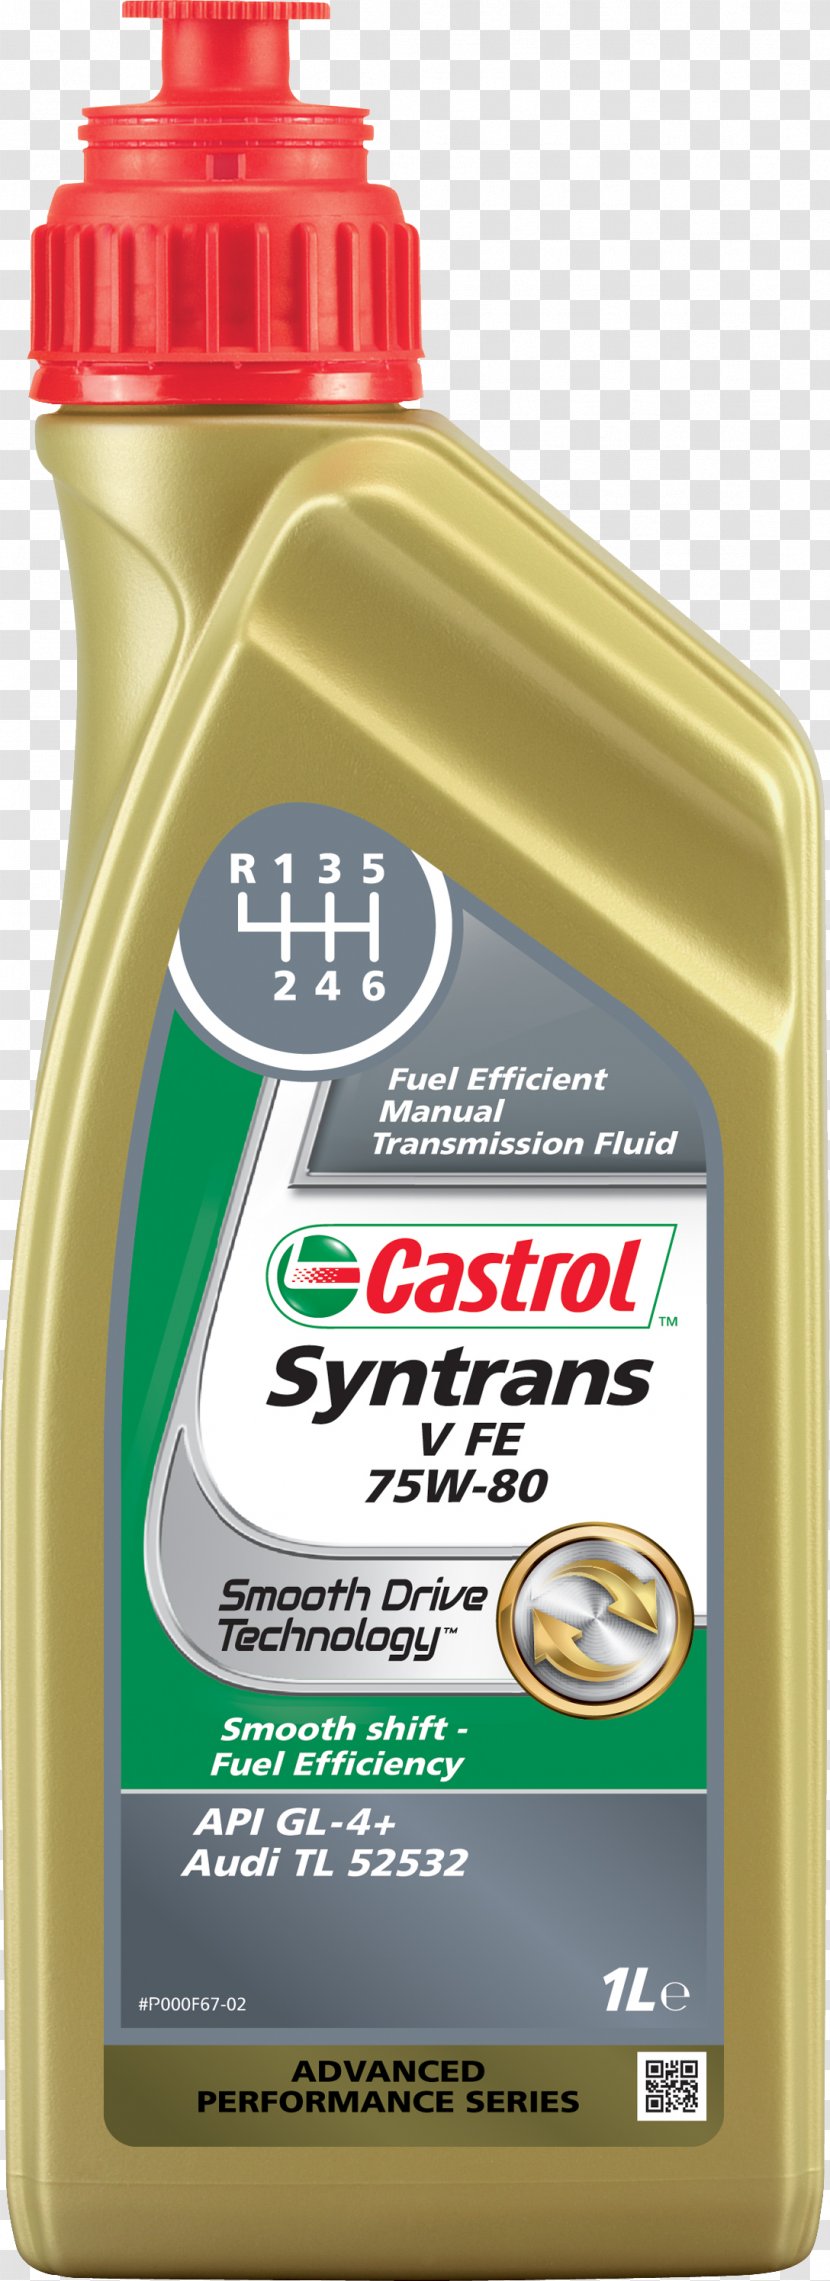 Car Gear Oil Synthetic Castrol Transaxle Transparent PNG